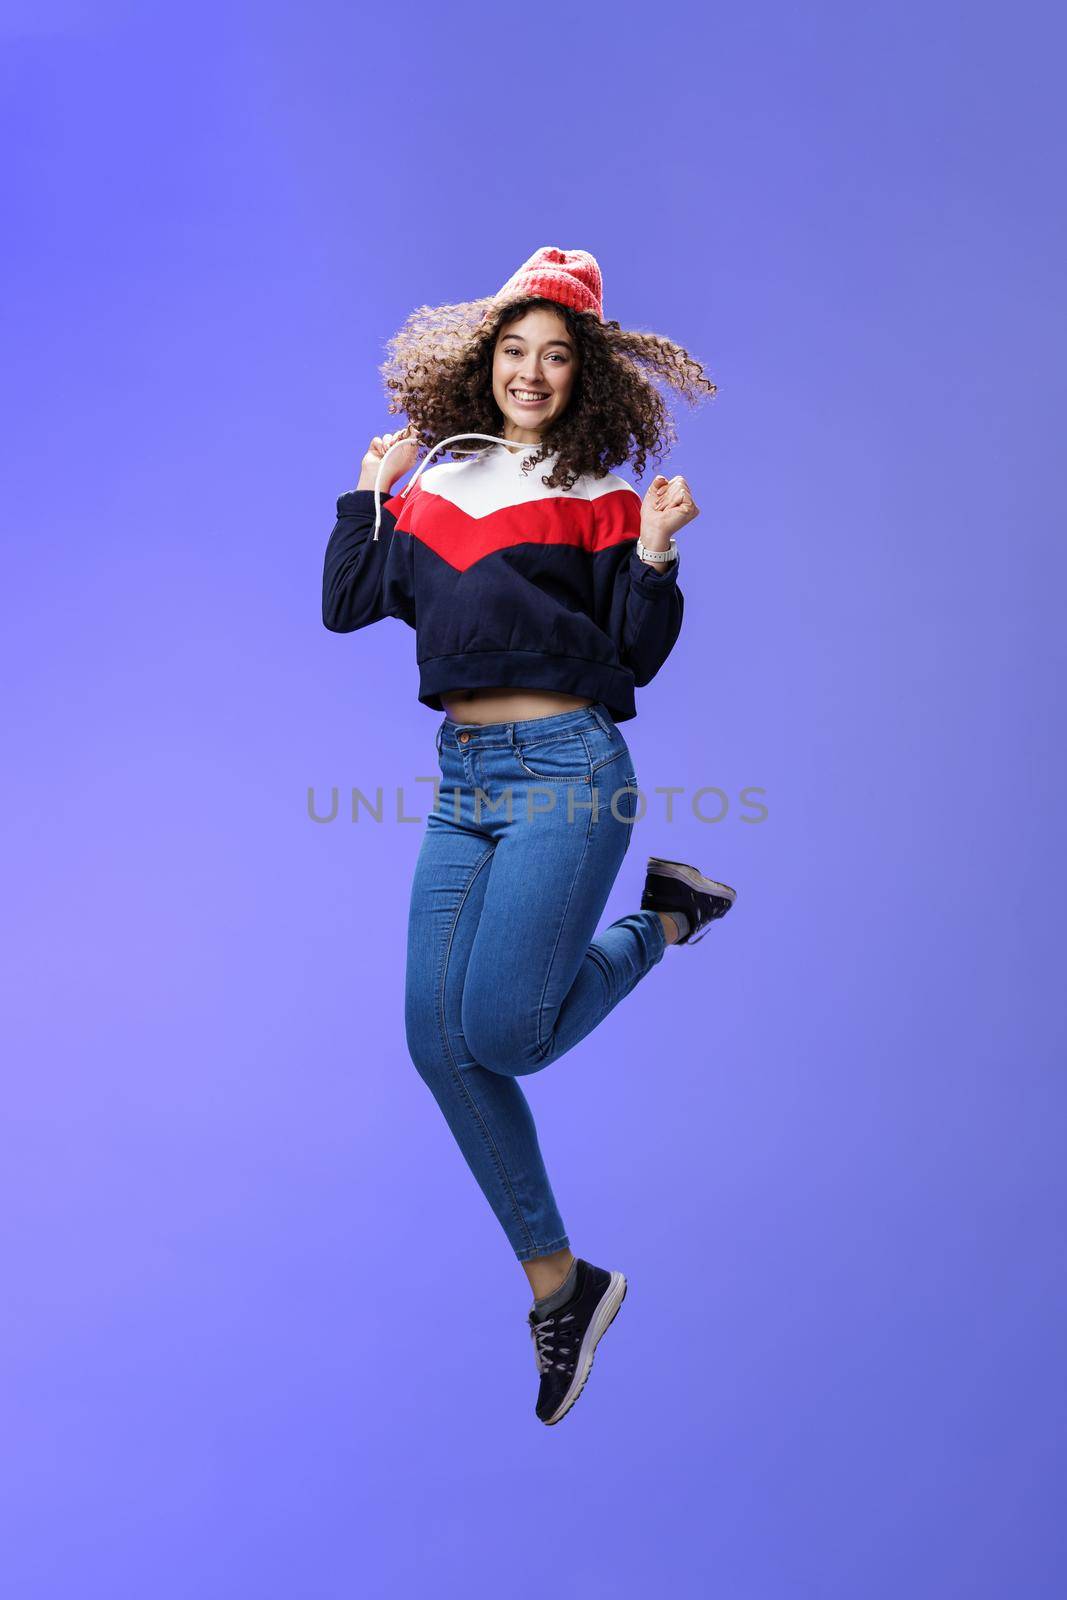 Delighted carefree and happy young woman with curly hair in warm beanie jumping joyfully having fun raising hands and smiling broadly posing over blue background in outdoor clothes.